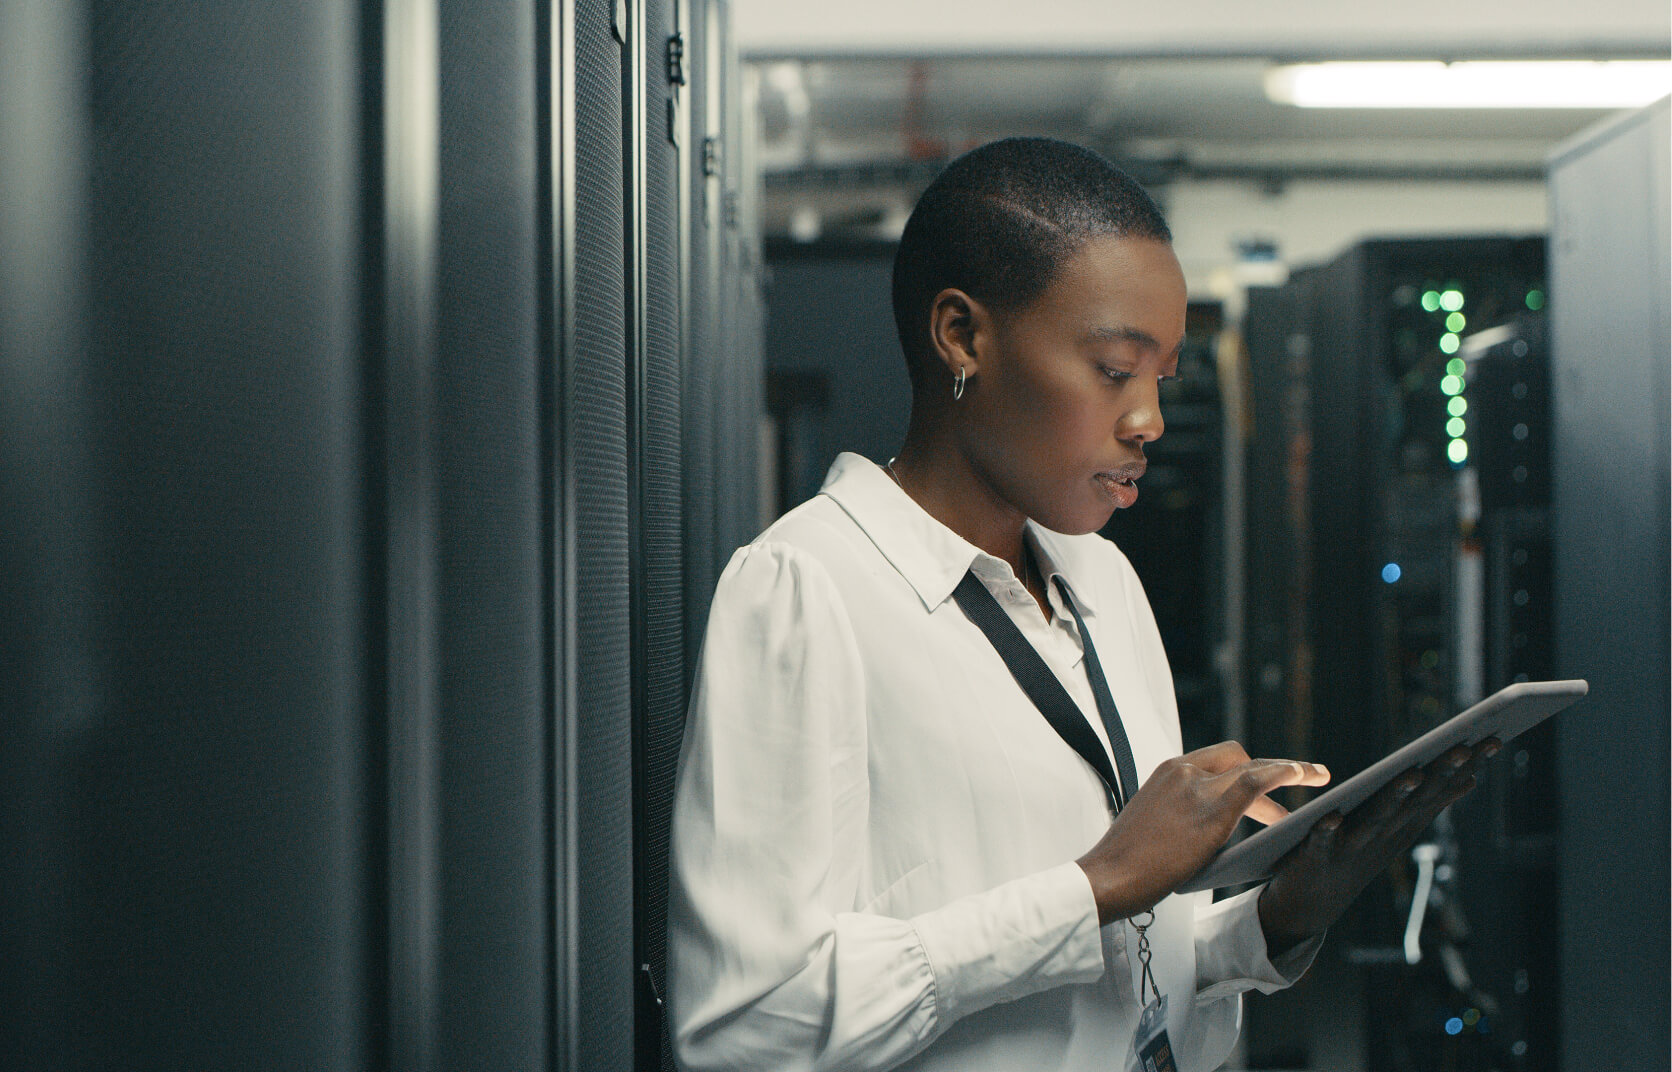 A female cybersecurity professional working on a handheld tablet in a high tech server room